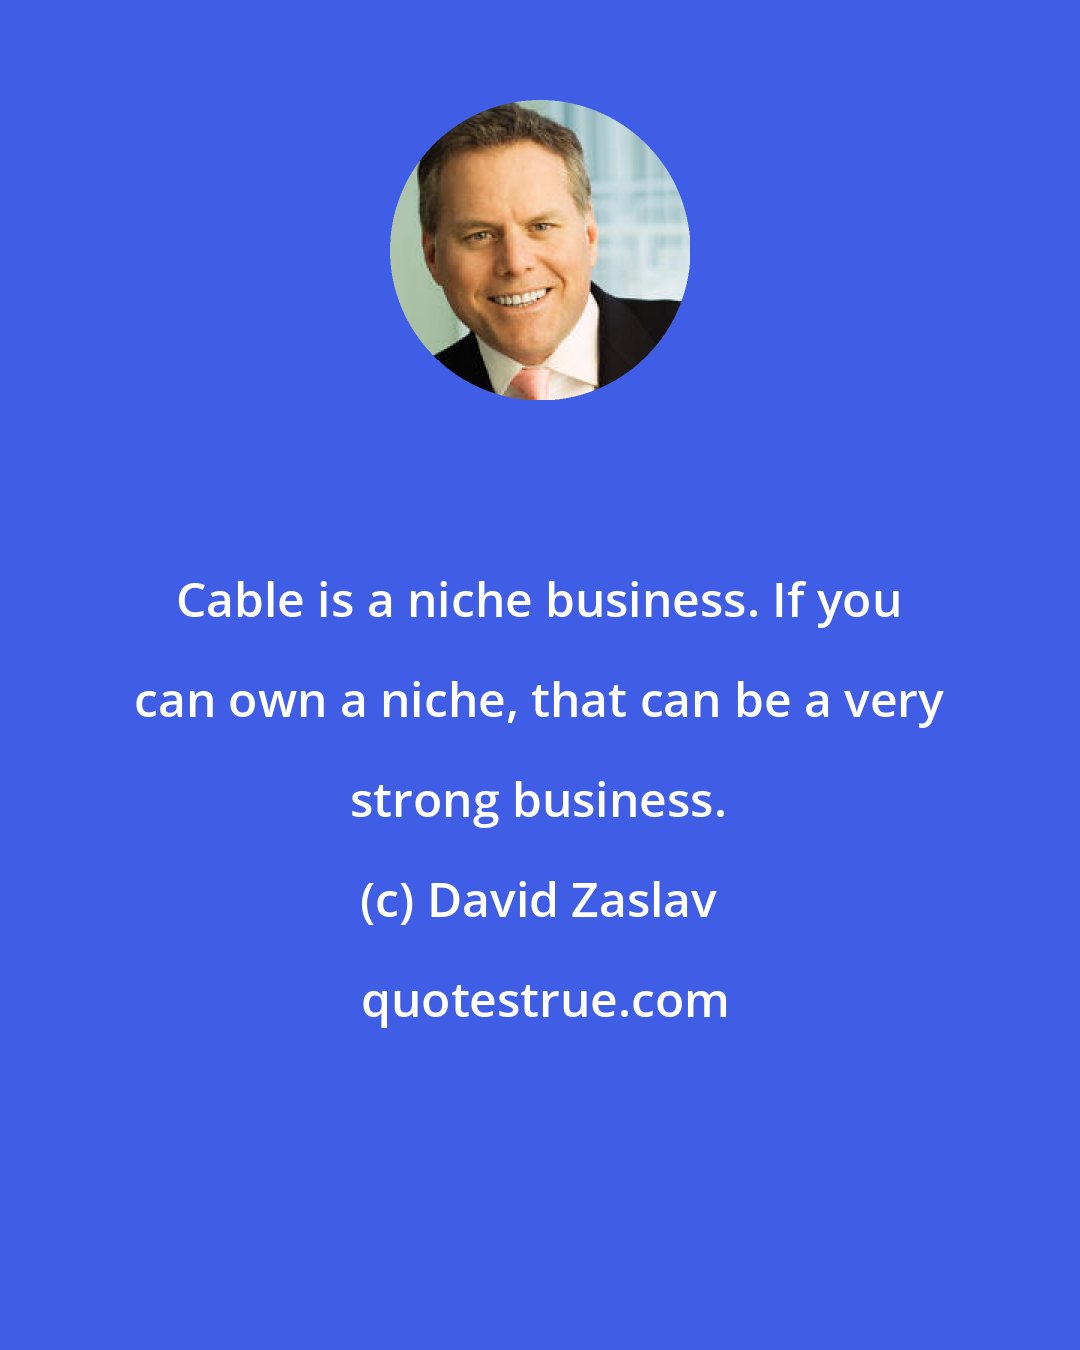 David Zaslav: Cable is a niche business. If you can own a niche, that can be a very strong business.